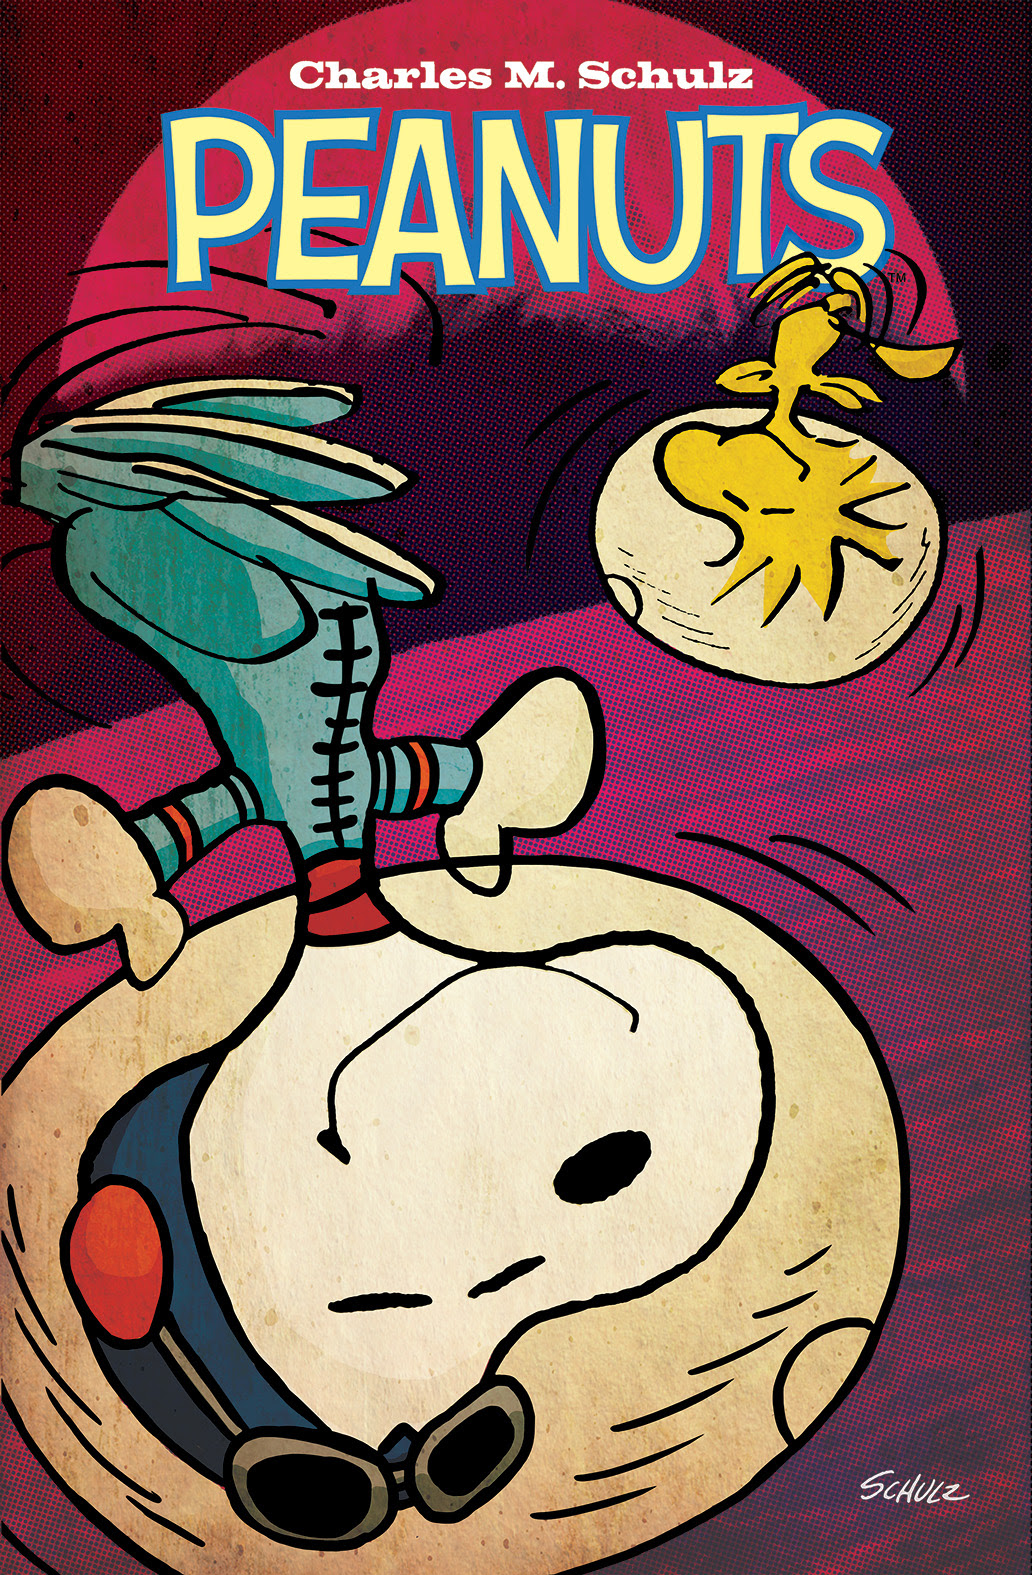 PEANUTS #19 Cover A by Charles Schulz, Various